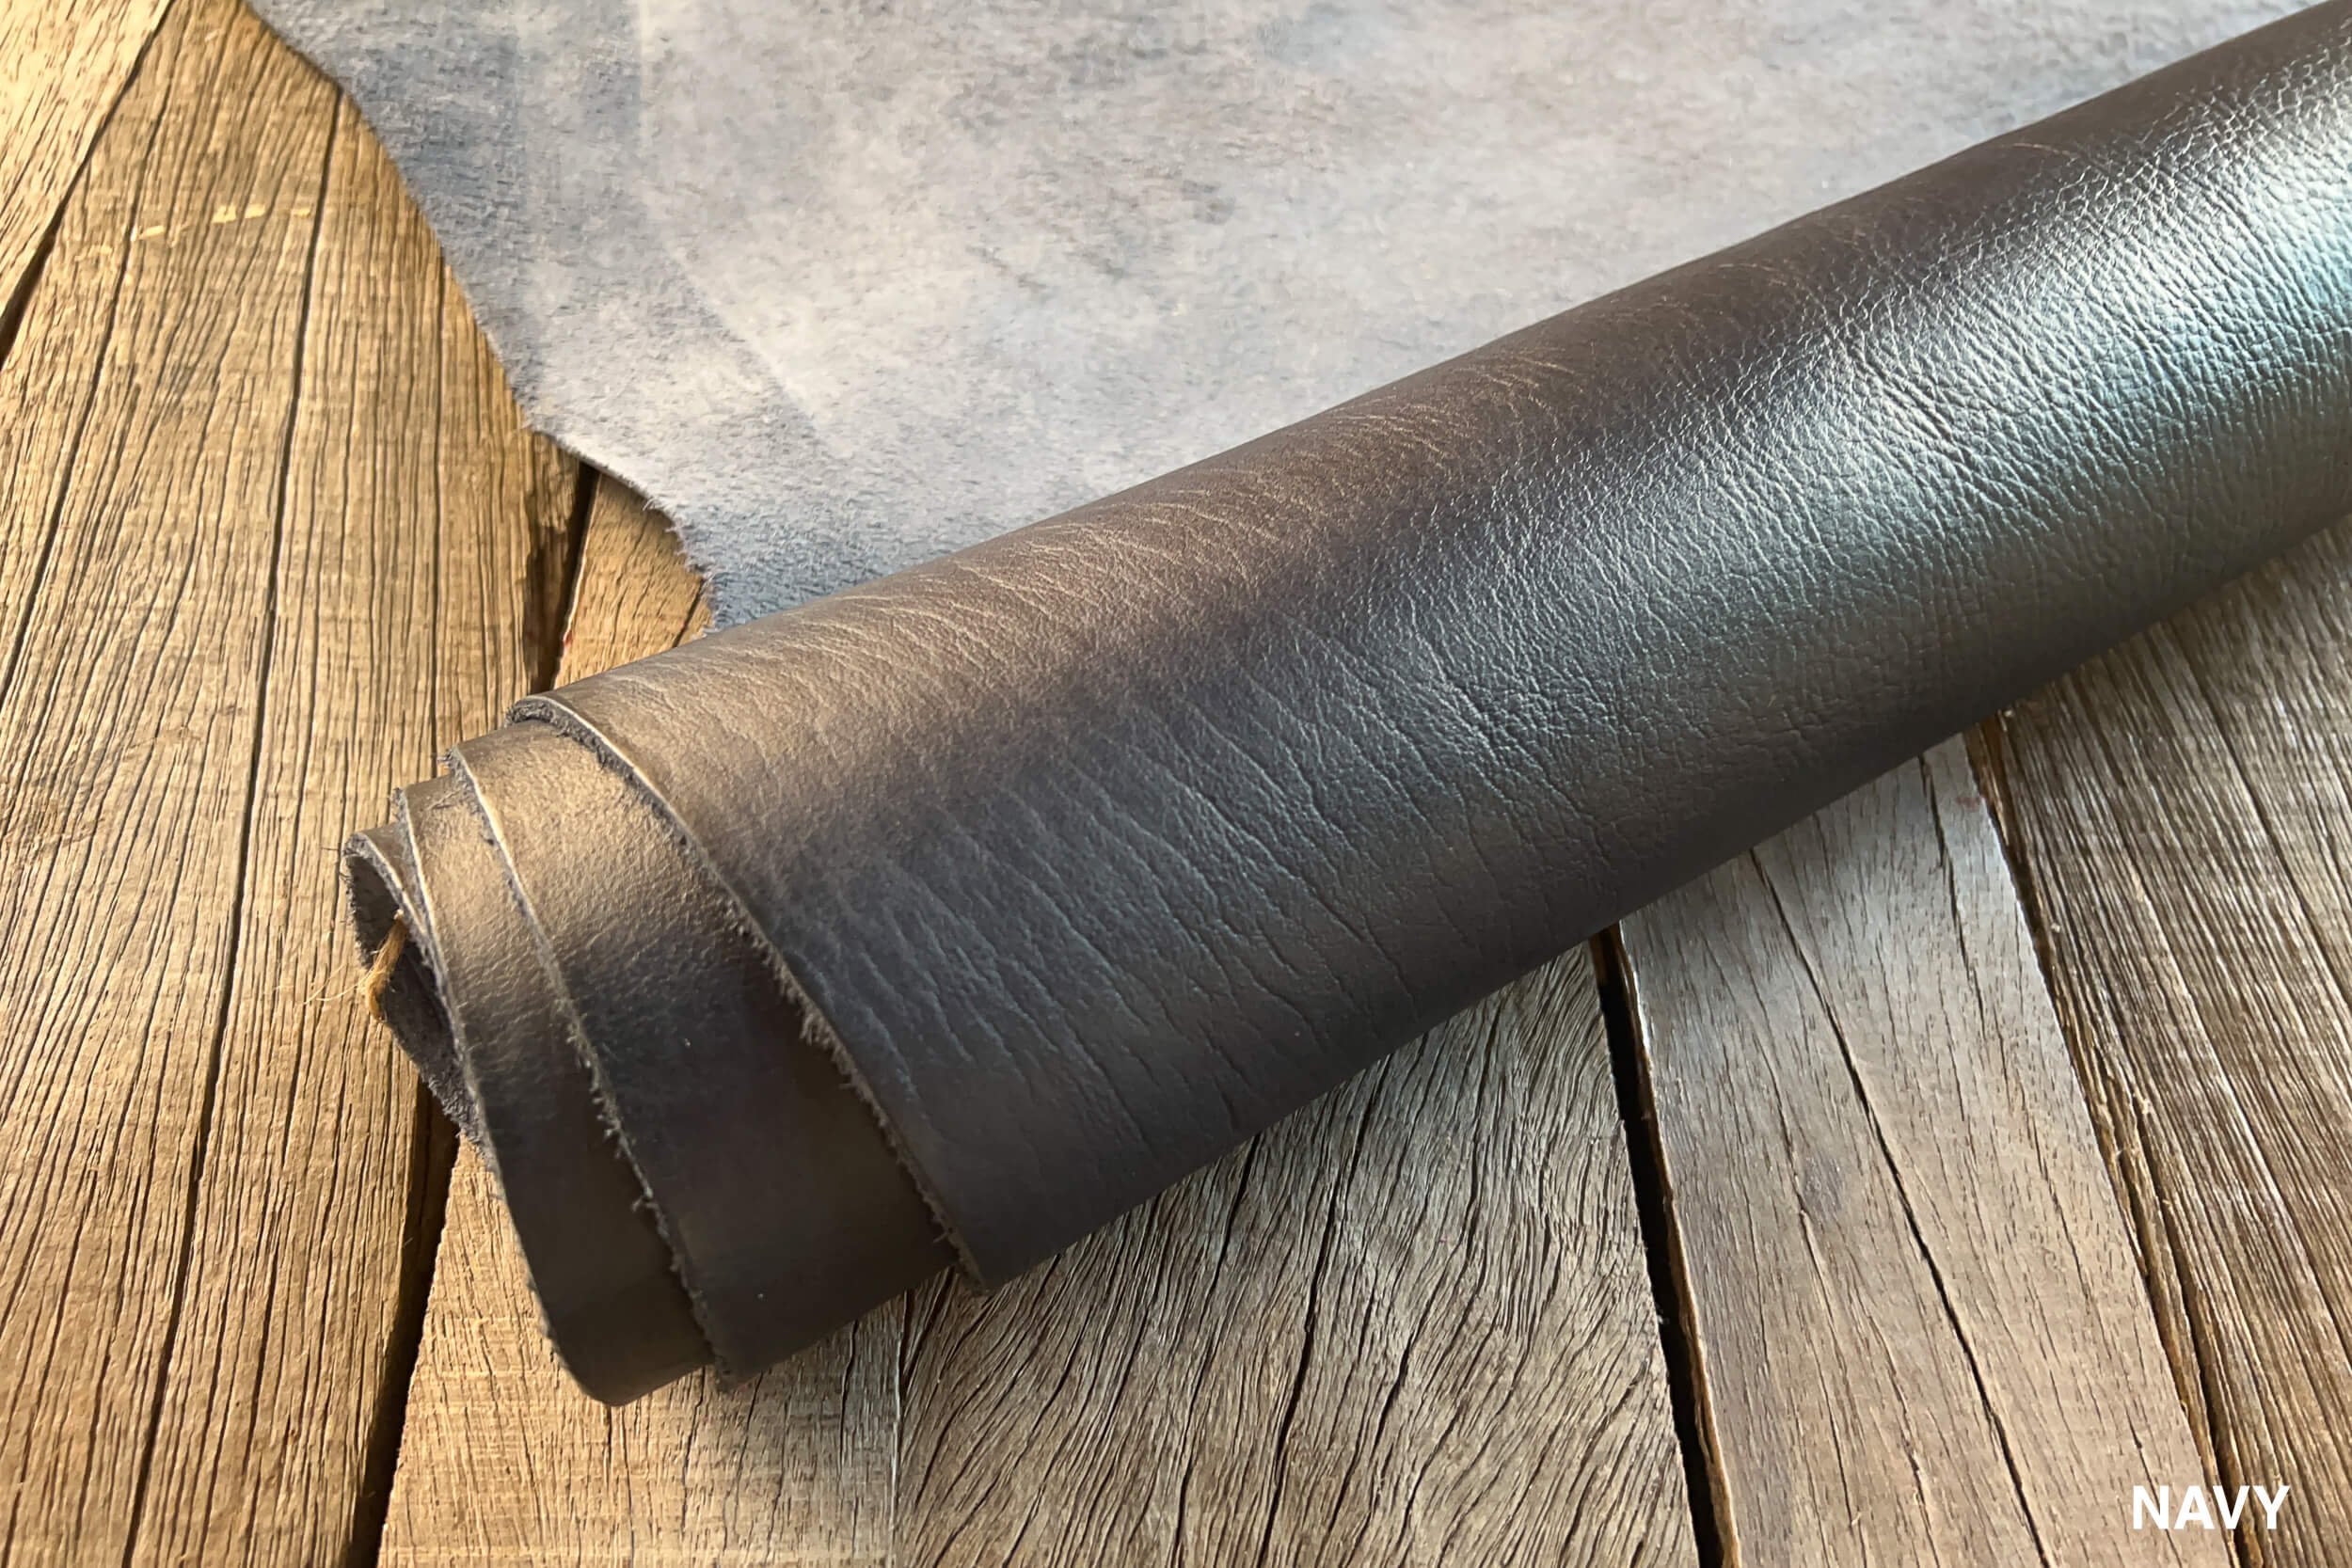 Horween Montana Bison Leather | The Tannery Row | Leather Distributor